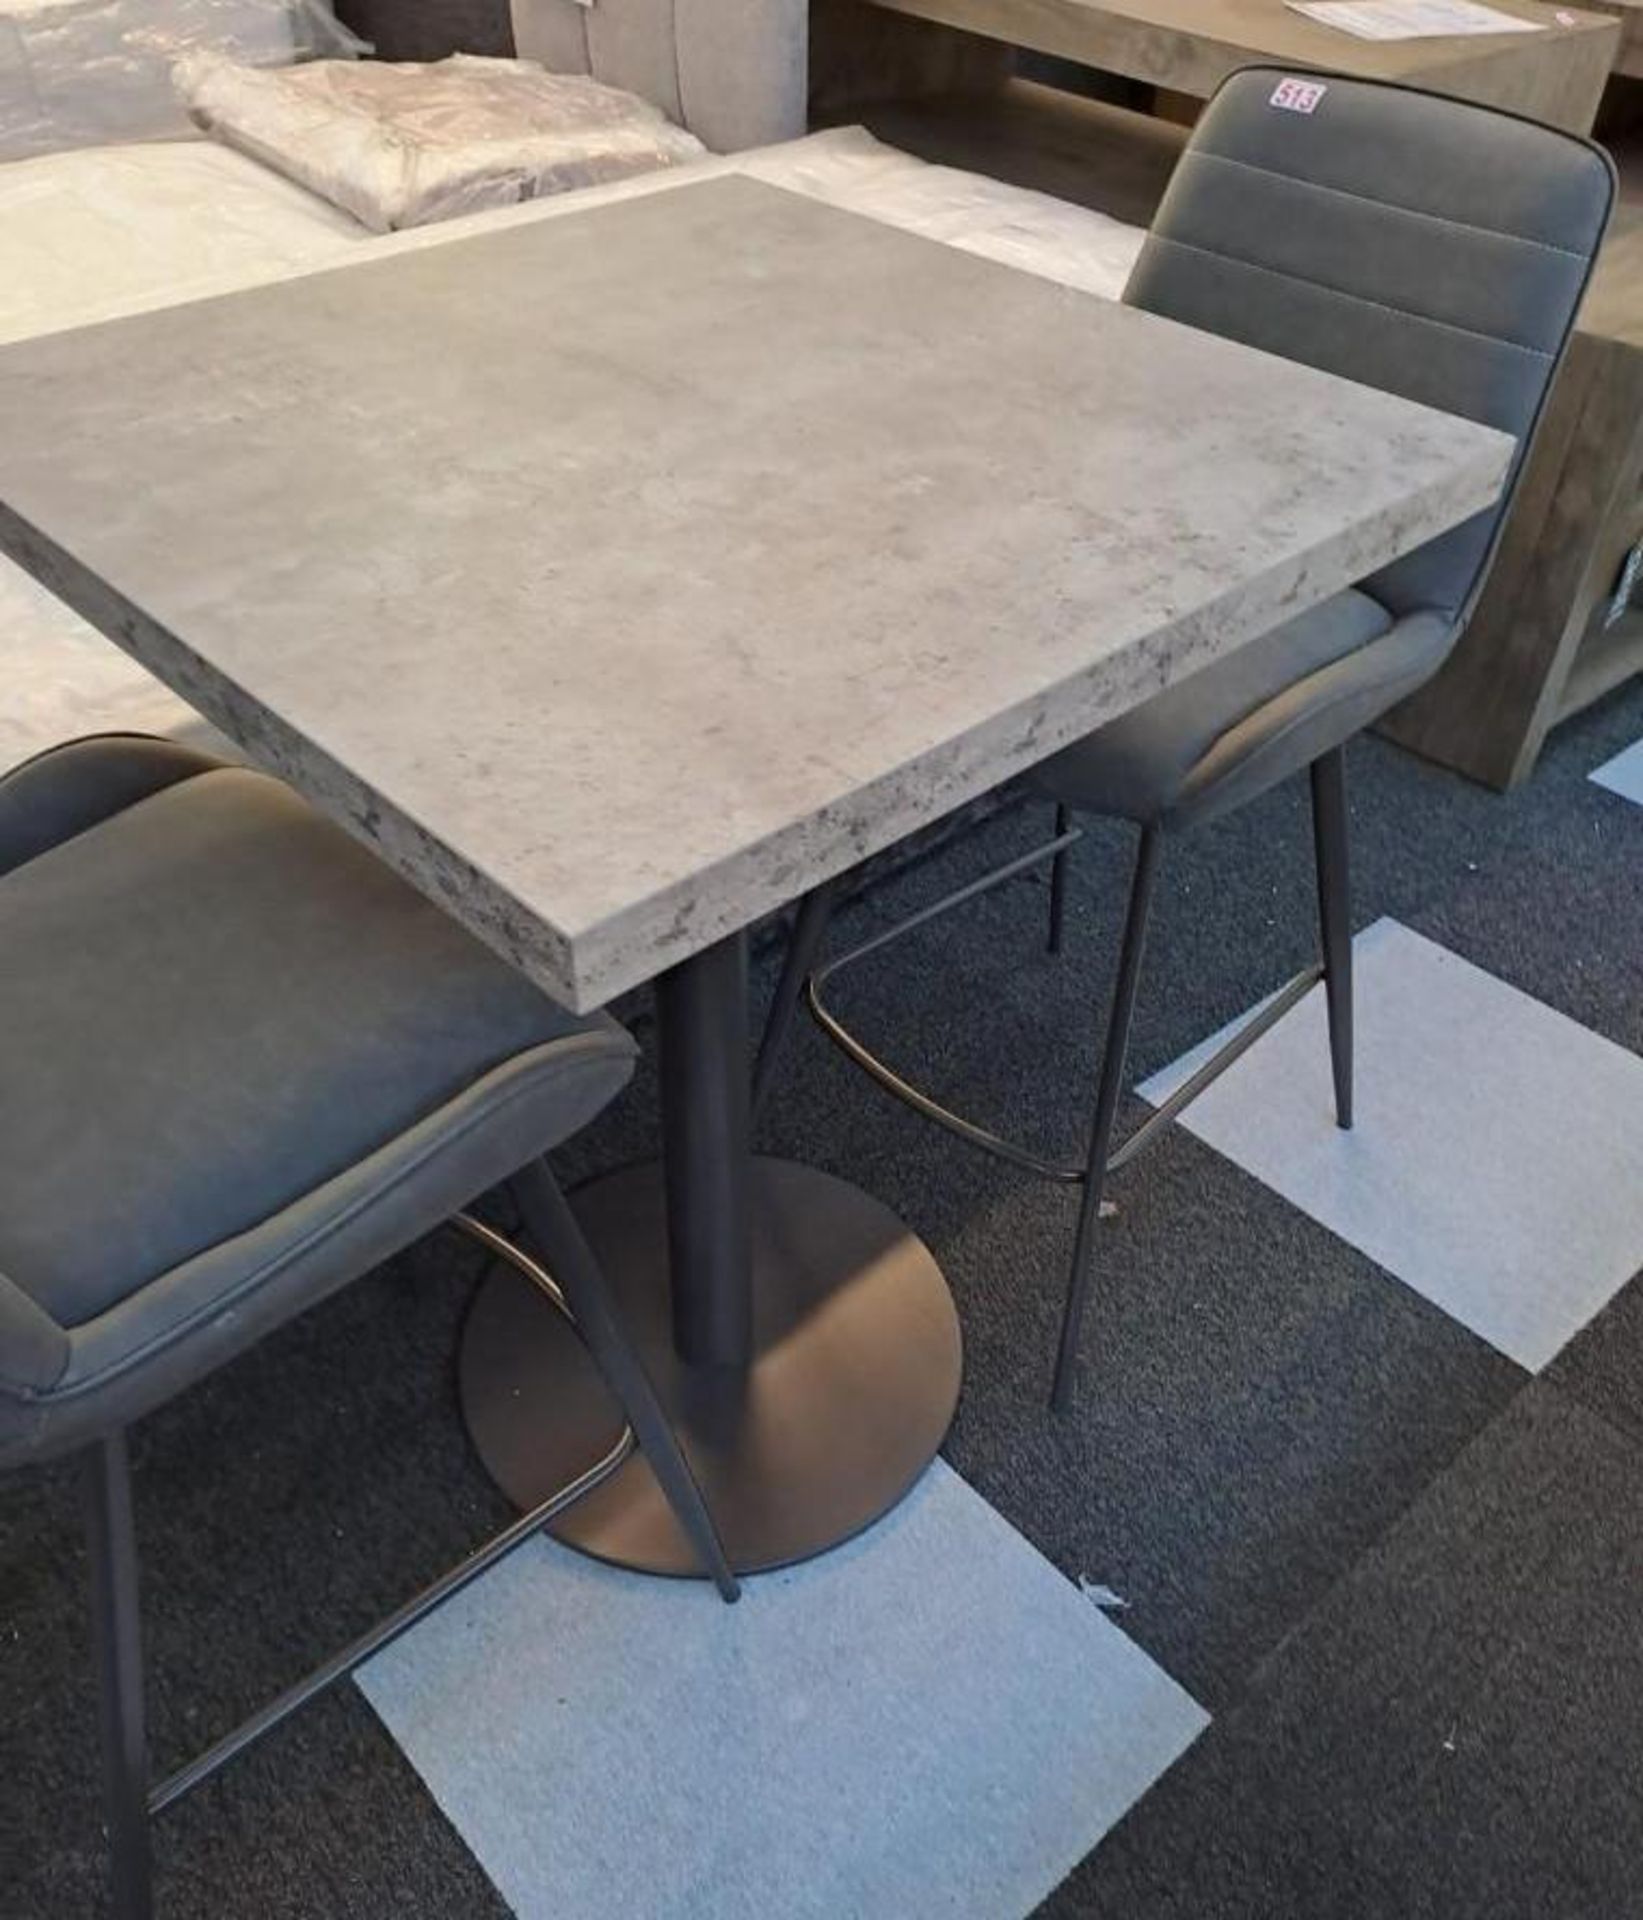 *EX DISPLAY* Furniture Village Moon concrete Grey marble finish bar table with 2 chairs. RRP: £649